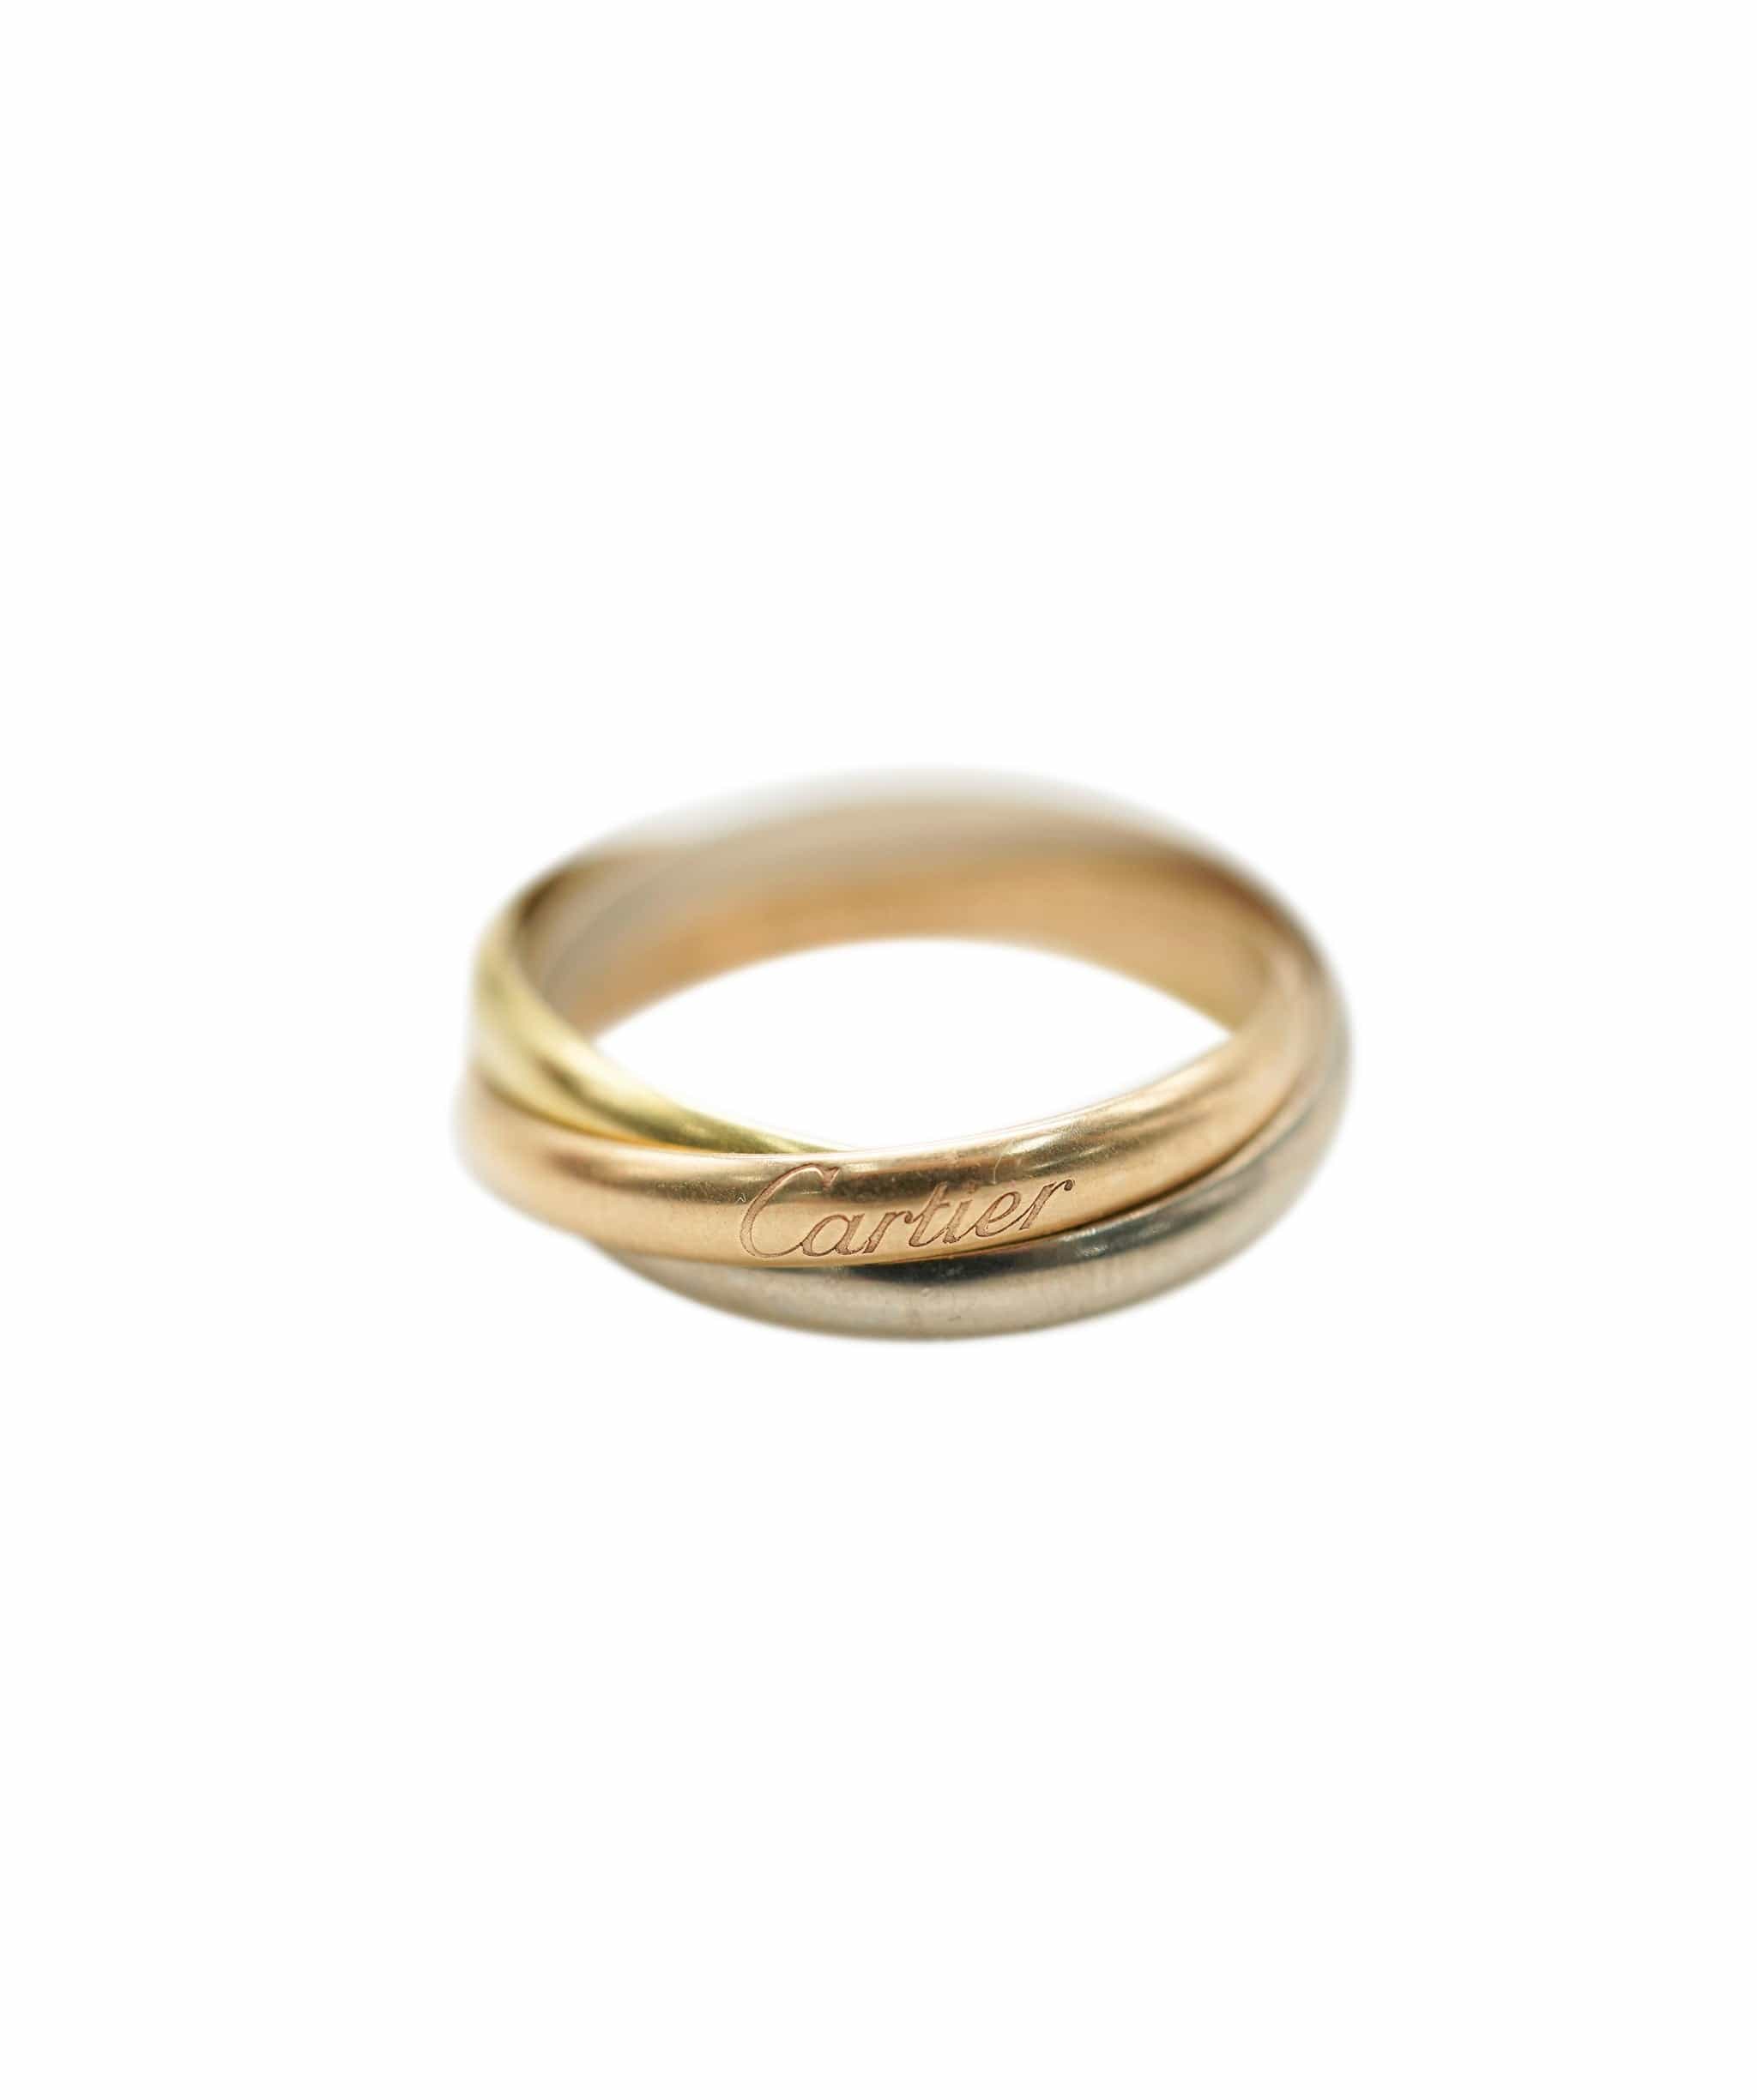 Cartier Cartier Trinity ring size 58 AHC1927